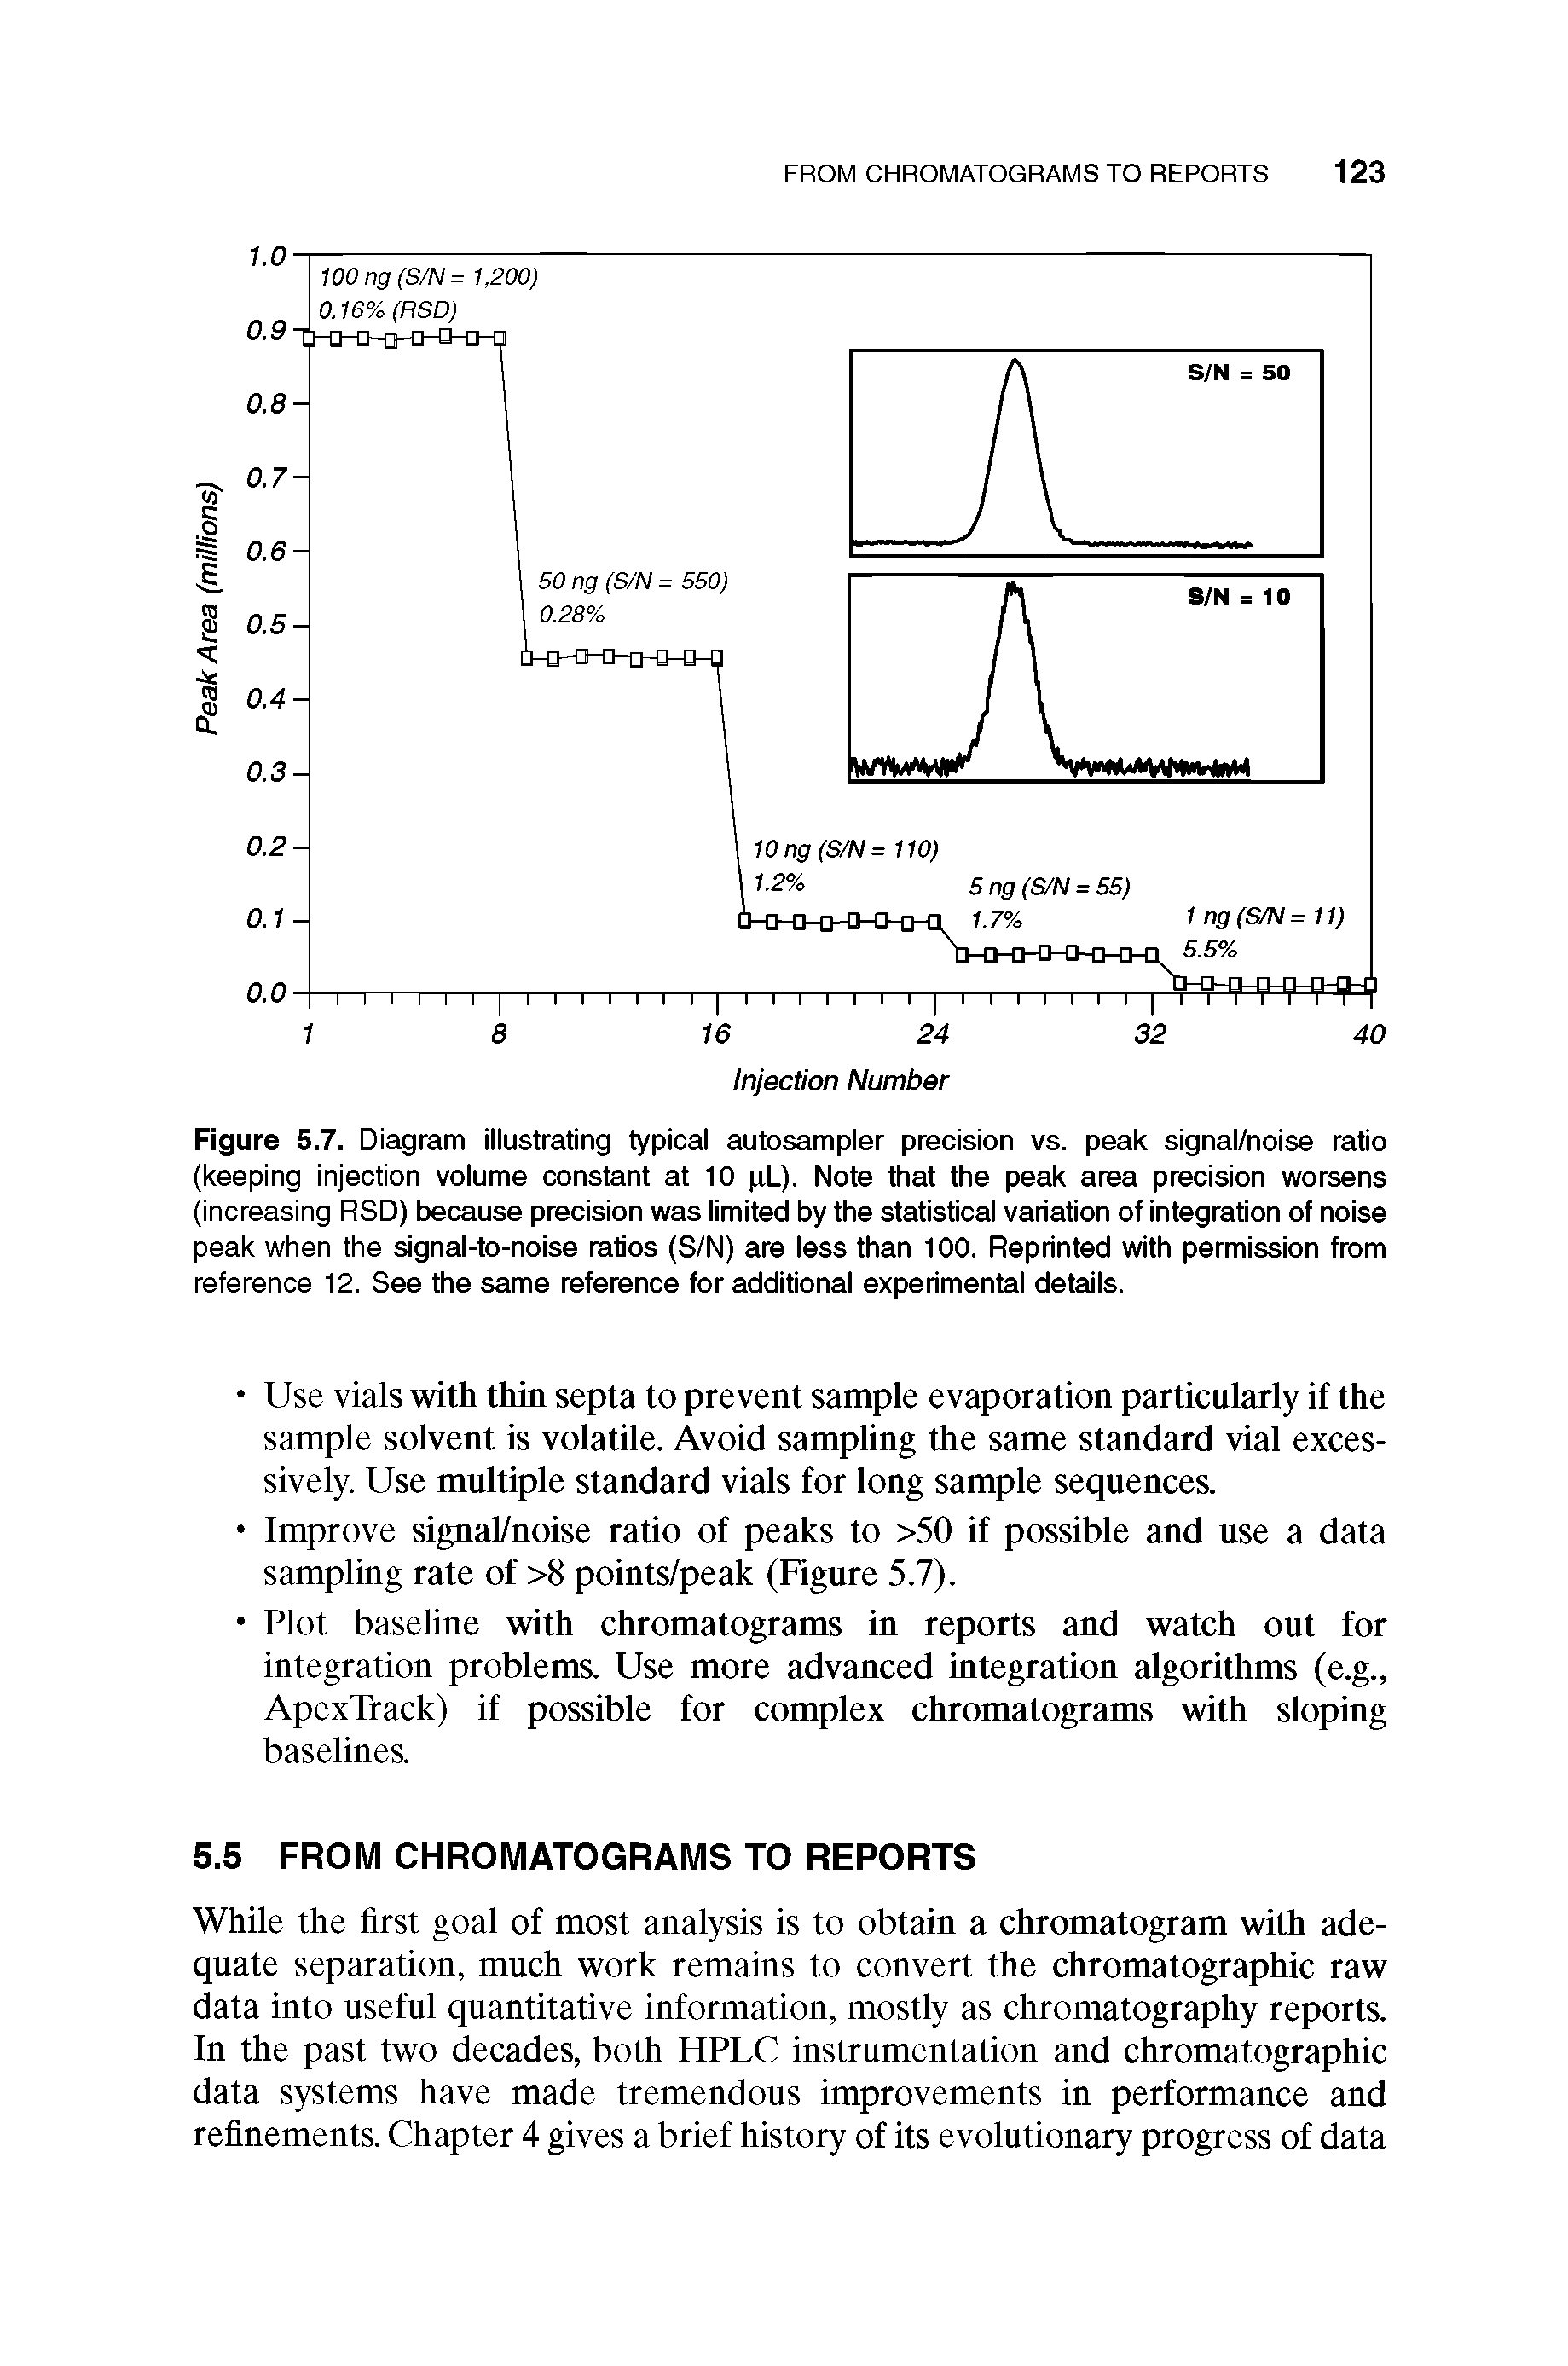 Figure 5.7. Diagram illustrating typical autosampler precision vs. peak signal/noise ratio (keeping injection volume constant at 10 pL). Note that the peak area precision worsens (increasing RSD) because precision was limited by the statistical variation of integration of noise peak when the signal-to-noise ratios (S/N) are less than 100. Reprinted with permission from reference 12. See the same reference for additional experimental details.